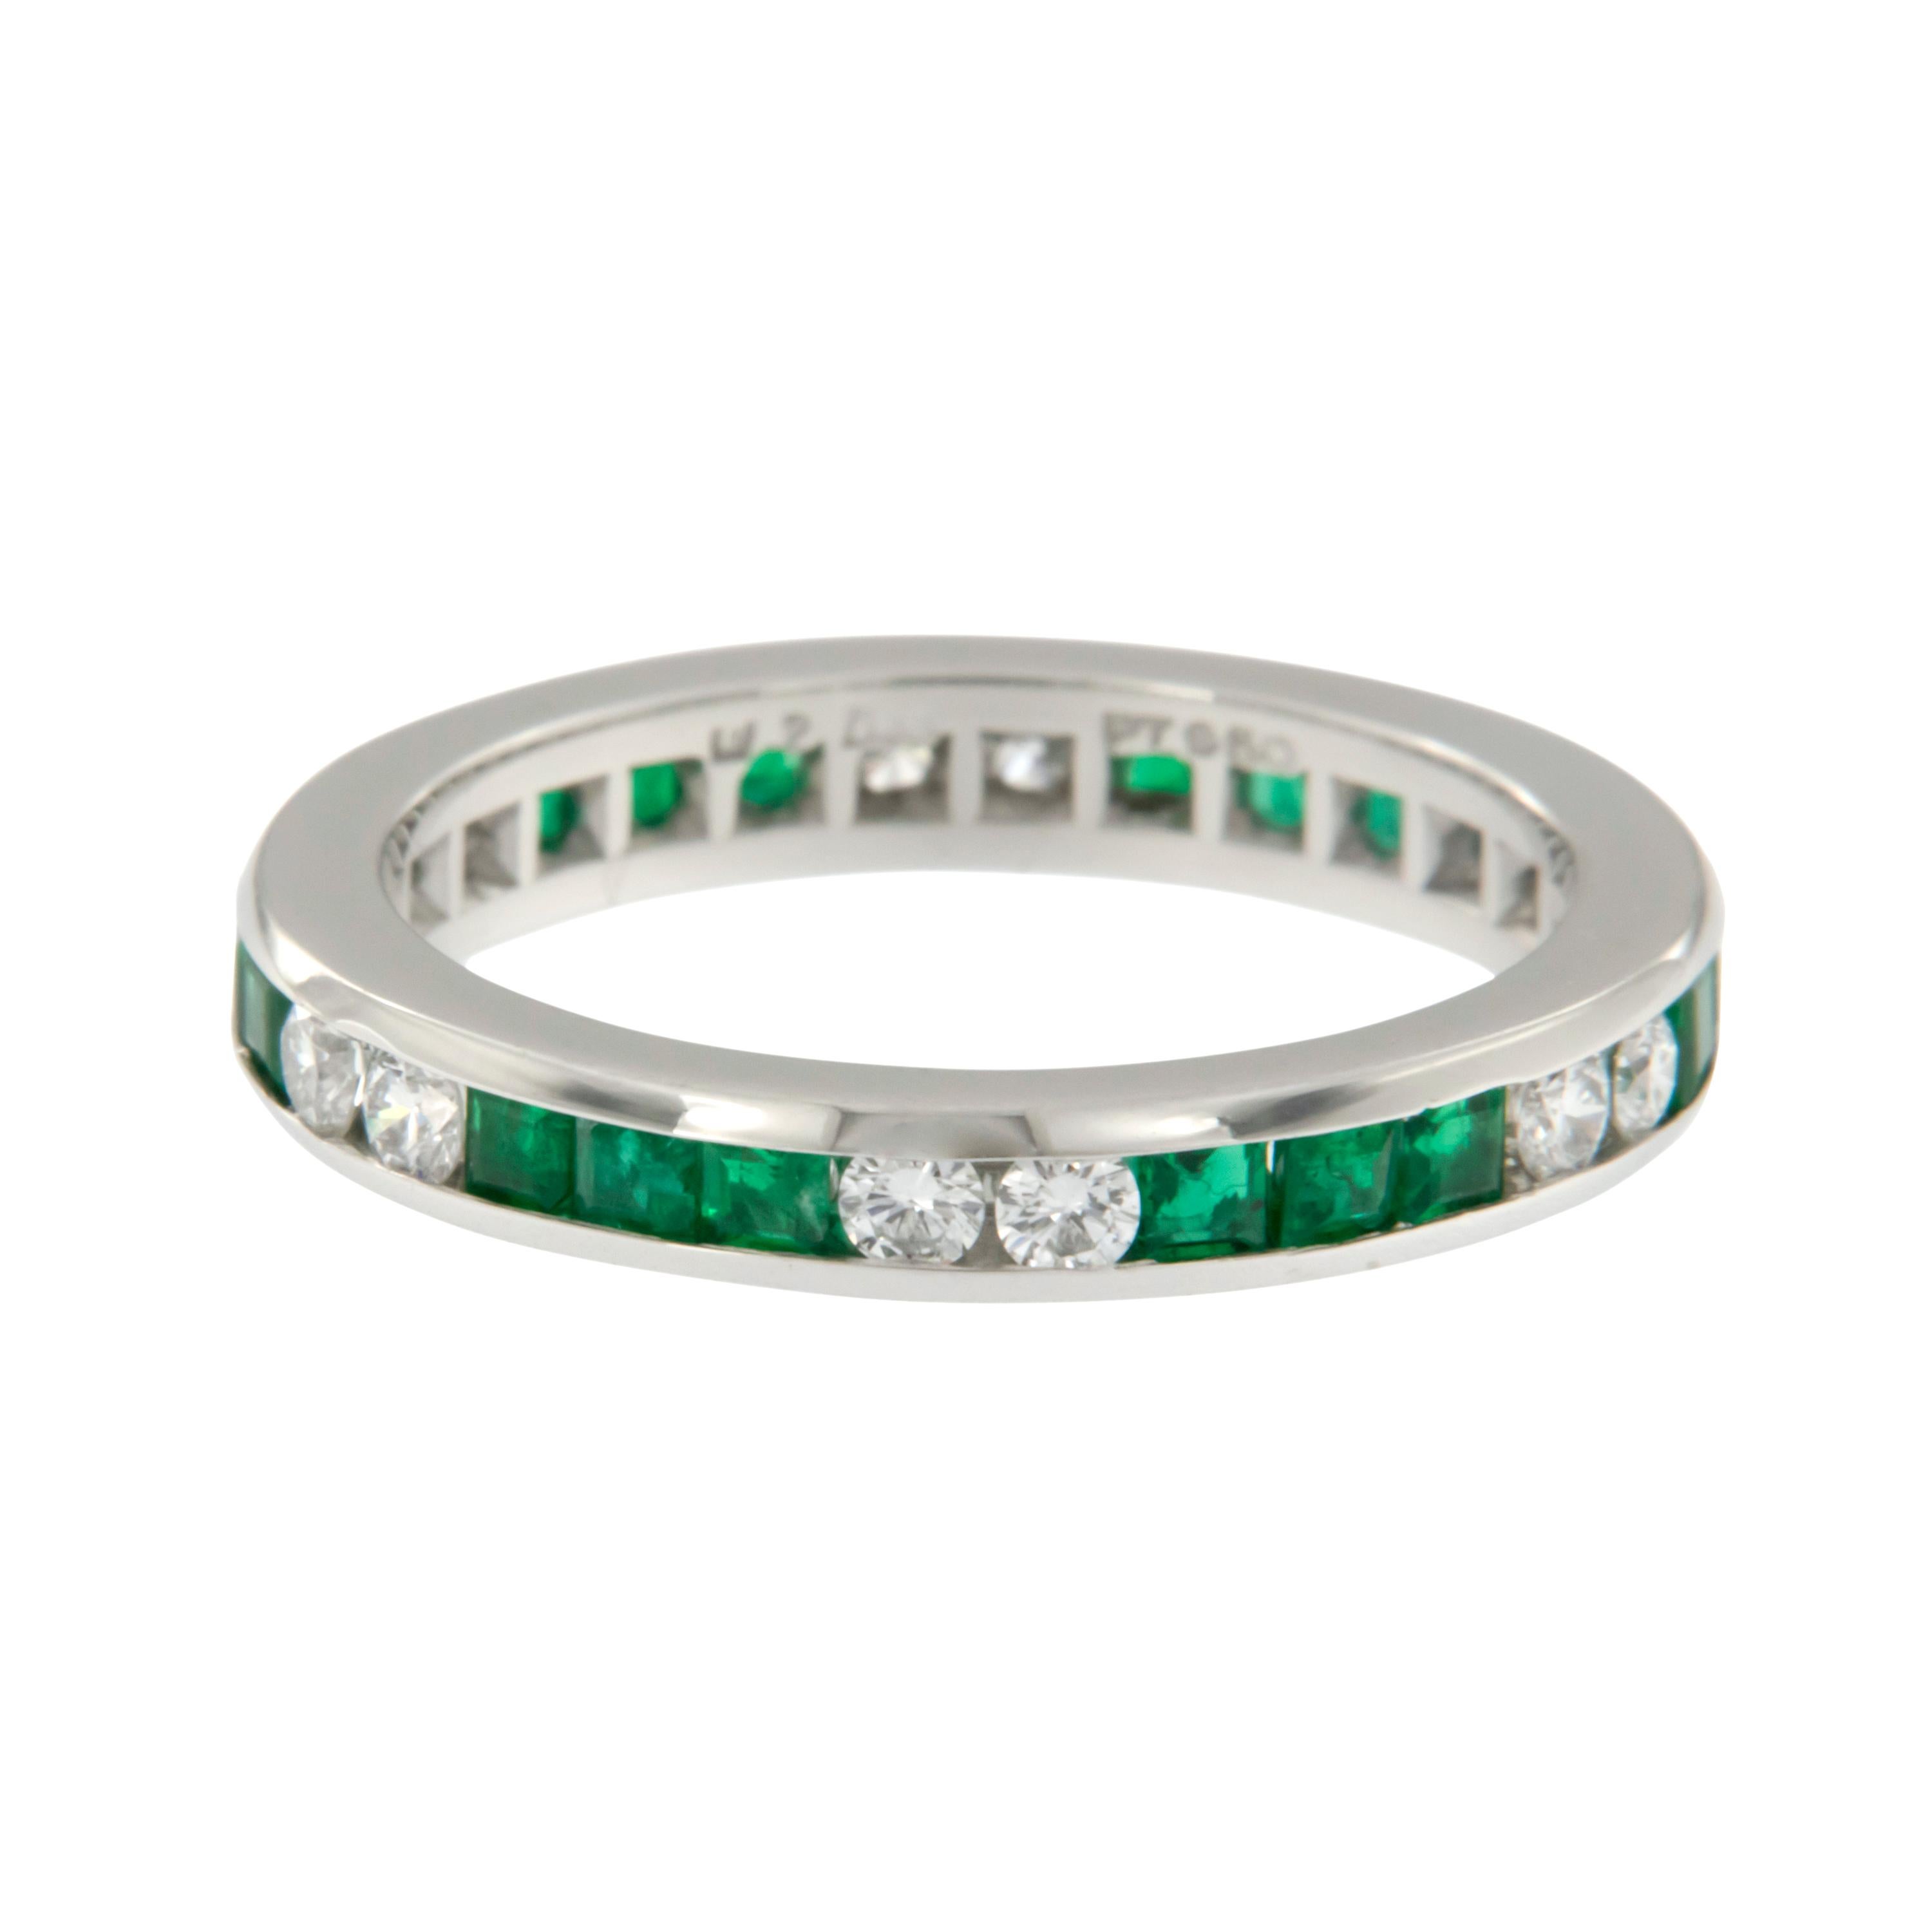 Square Cut Matched Set of Plat 1.35 Cttw Emeralds and 0.43 Cttw Diamond Eternity Bands